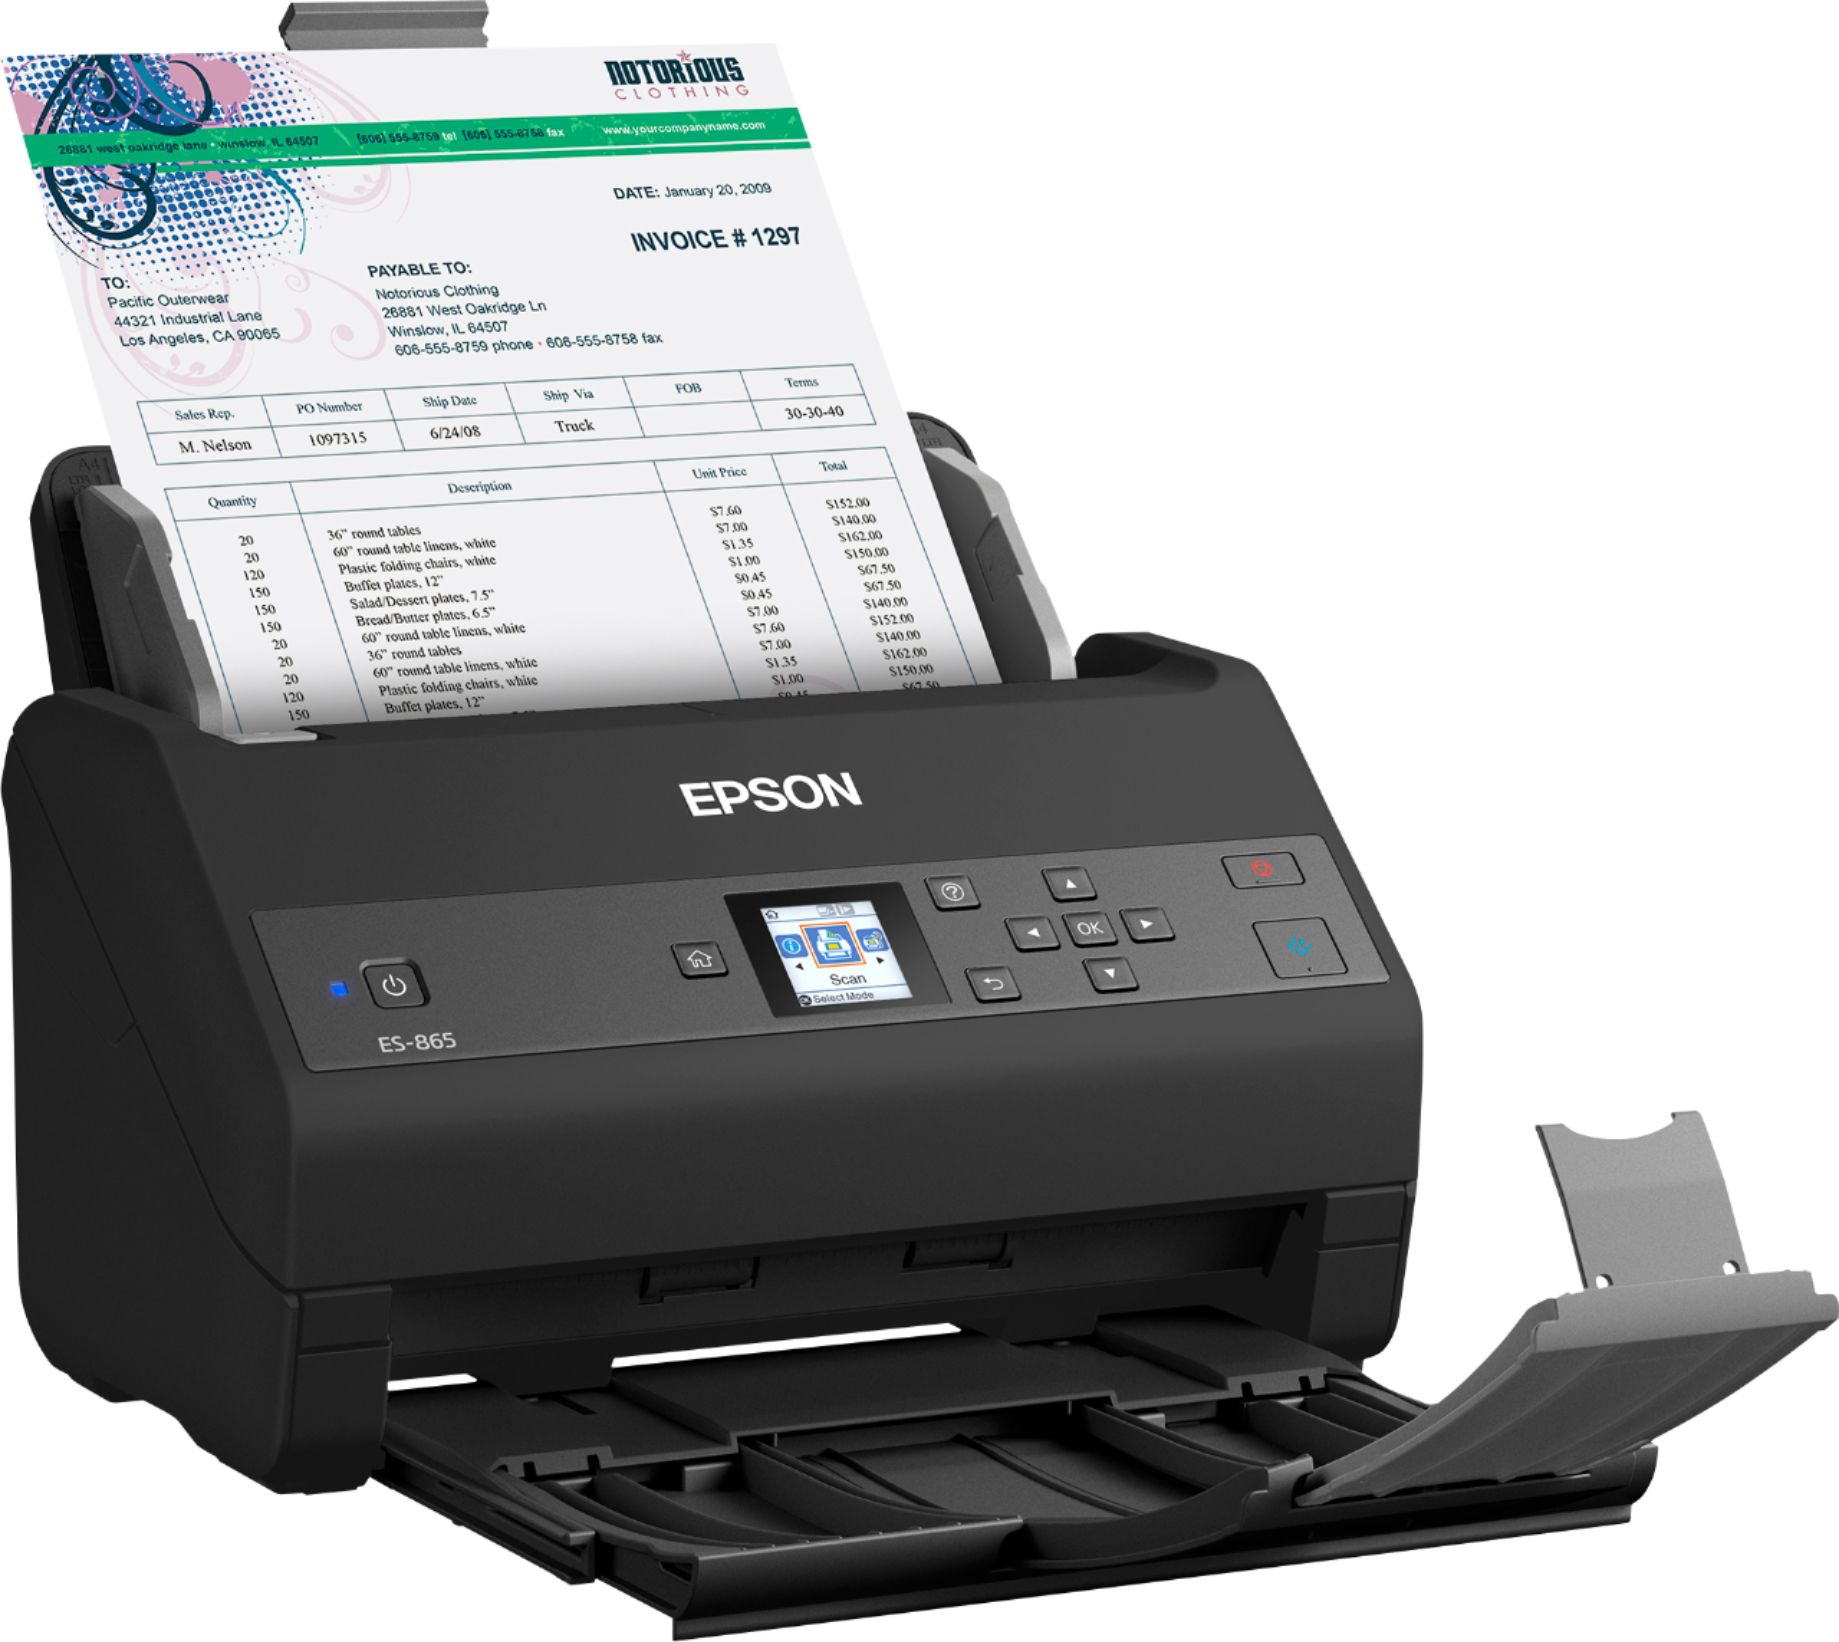 Angle View: Canon imageFORMULA R50 Office Document Scanner